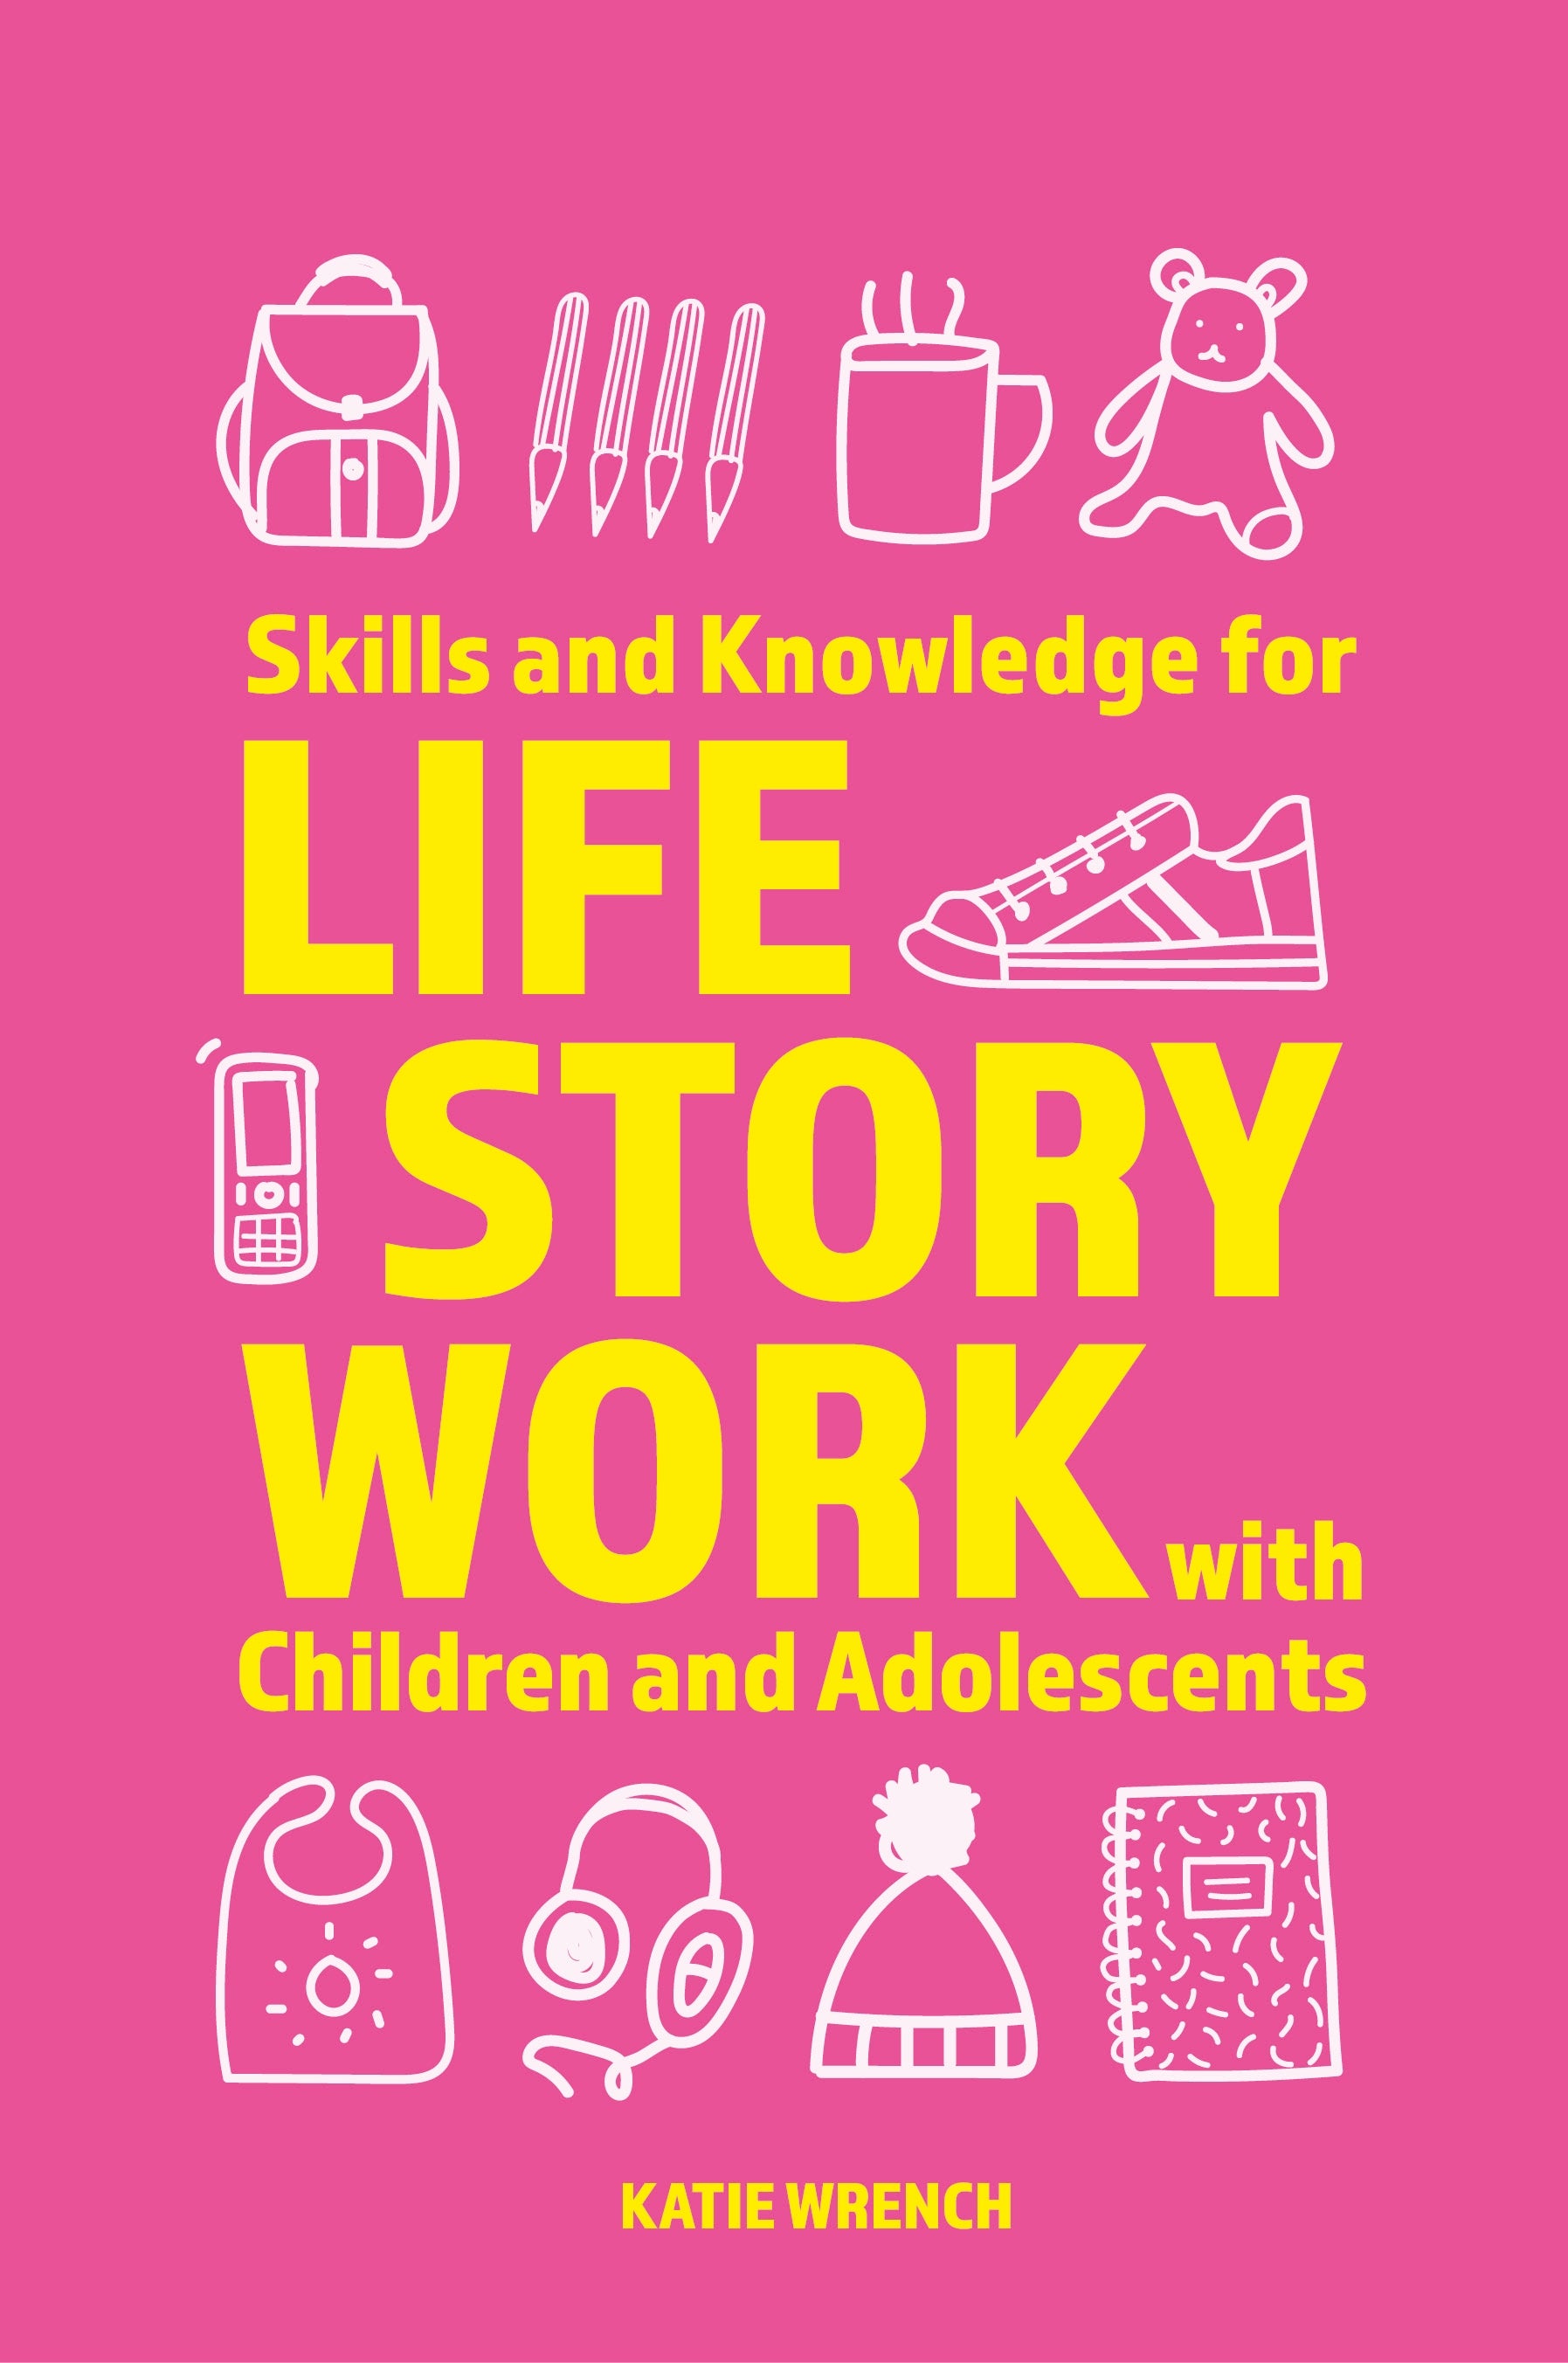 Skills and Knowledge for Life Story Work with Children and Adolescents by Katie Wrench